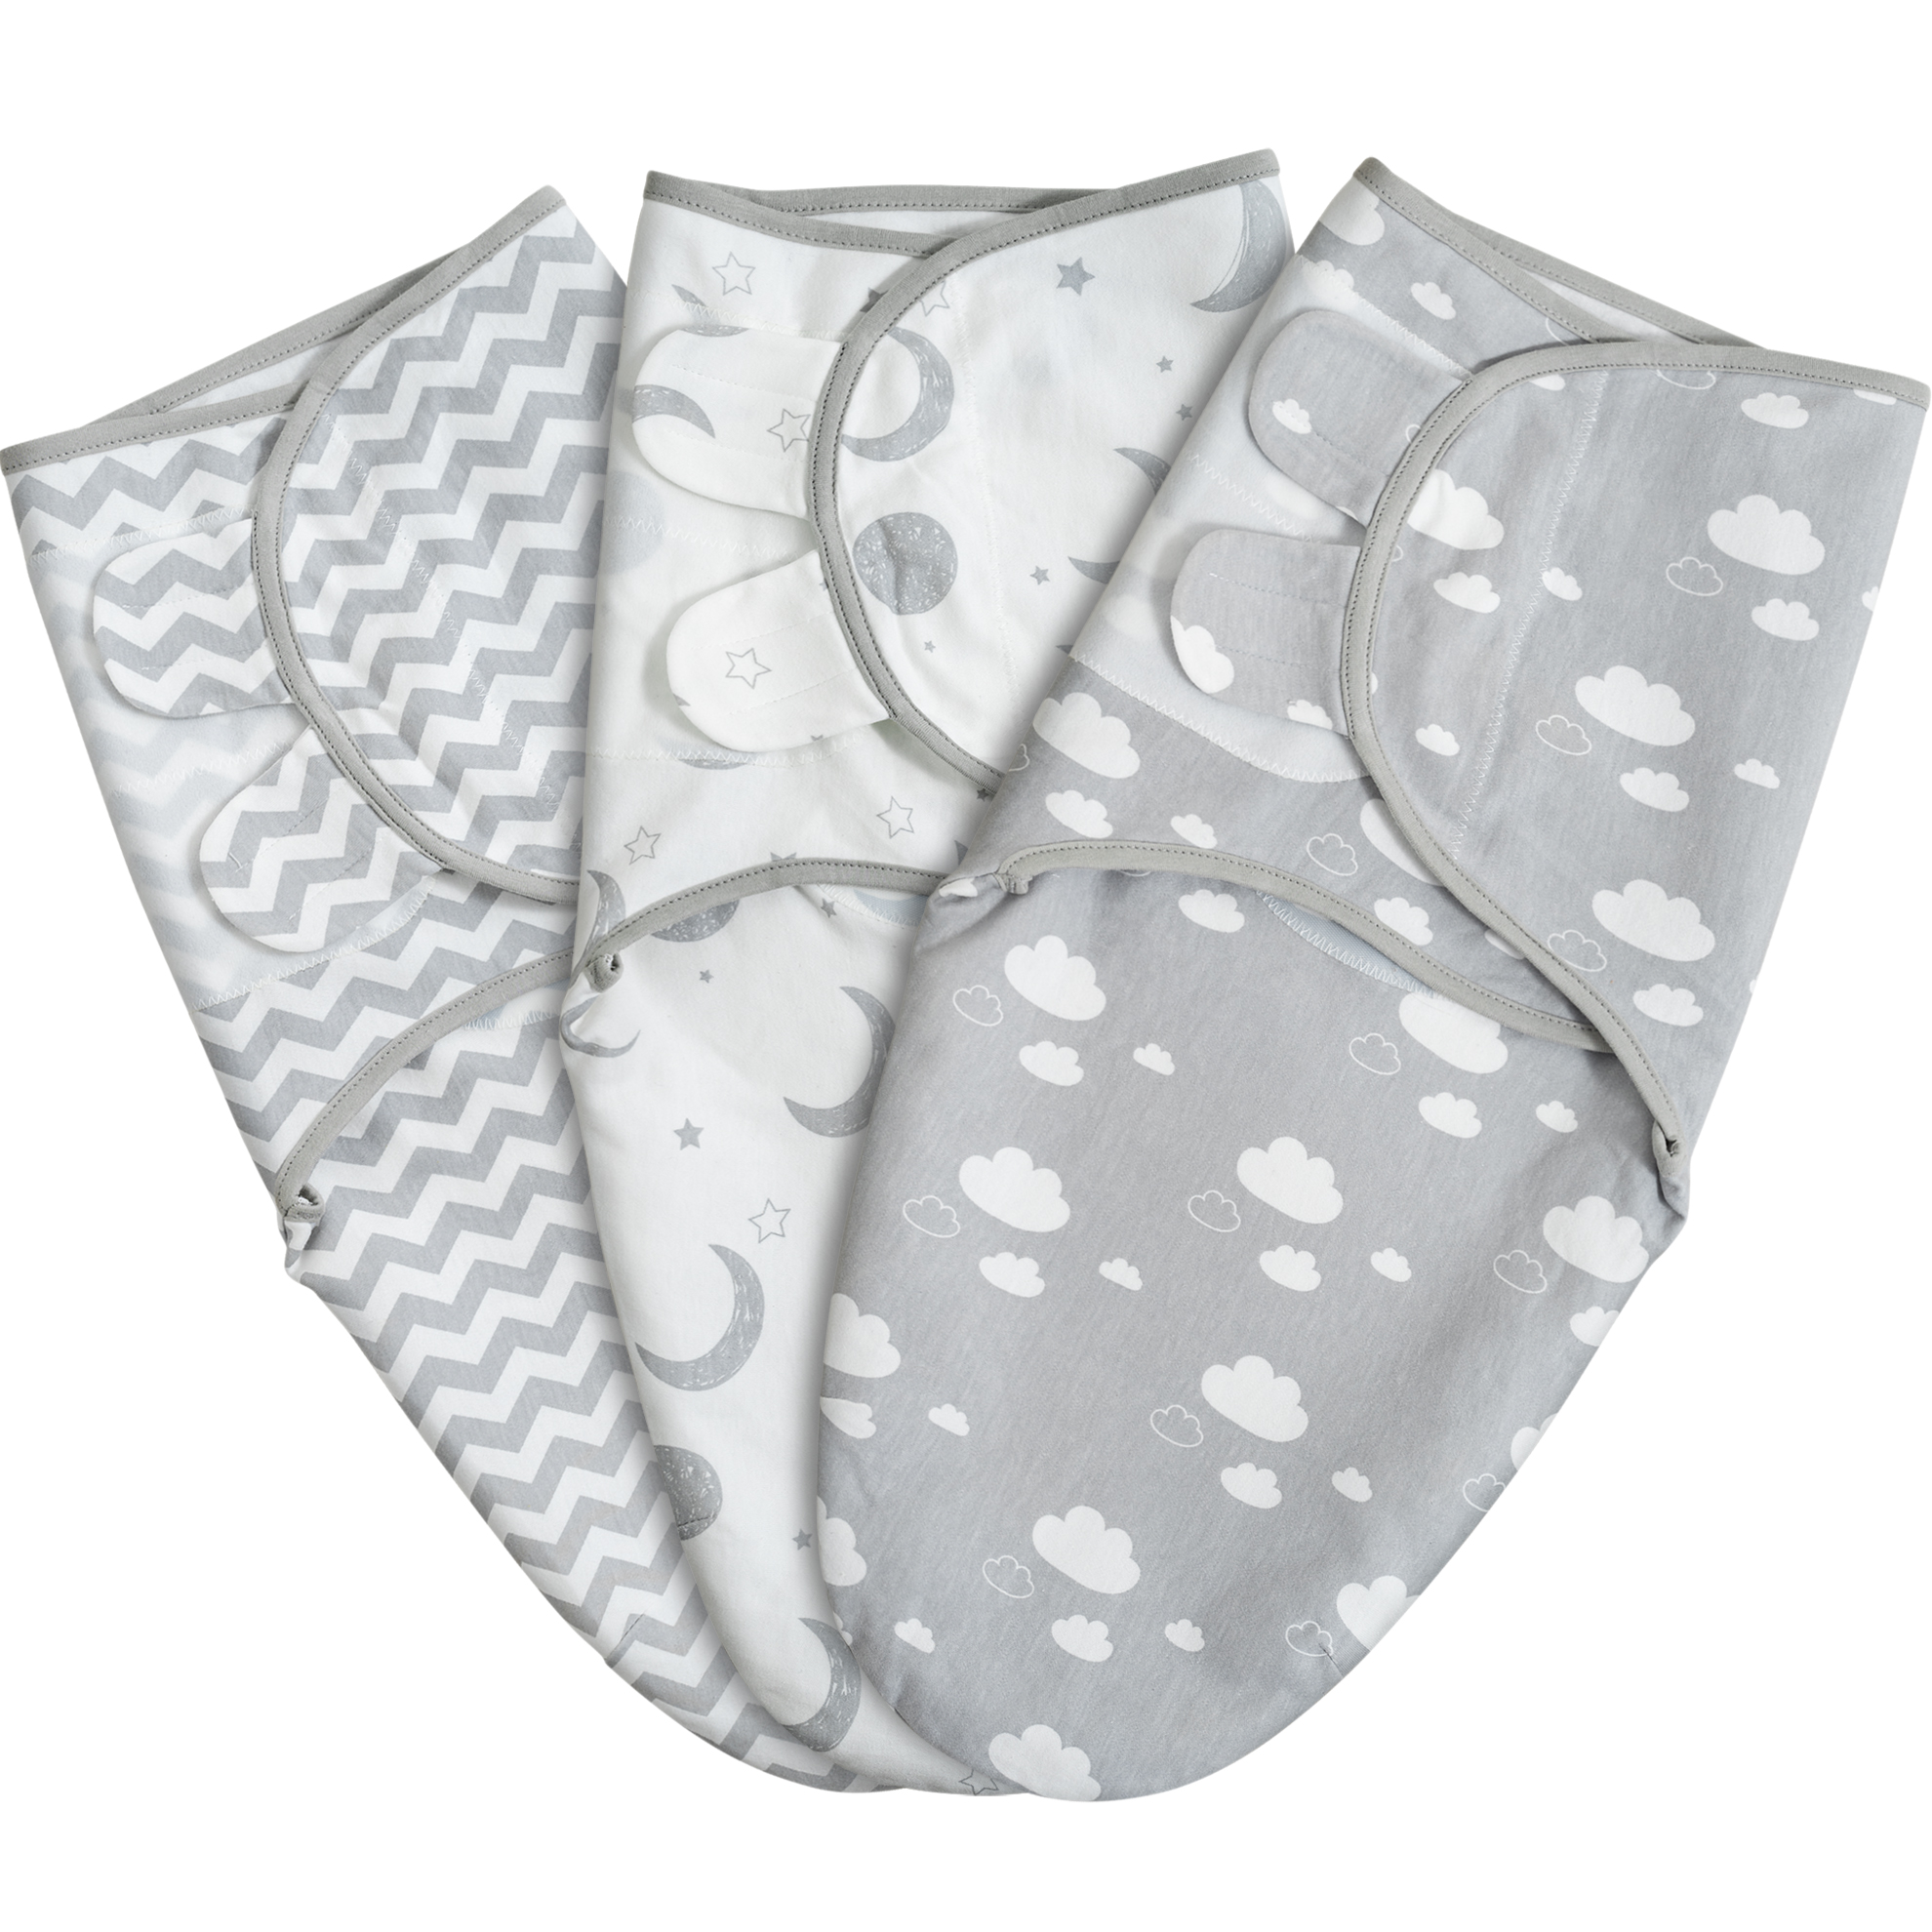 Clounds & Moon | Gllquen Baby Swaddle 0-3 Months 3 Pack